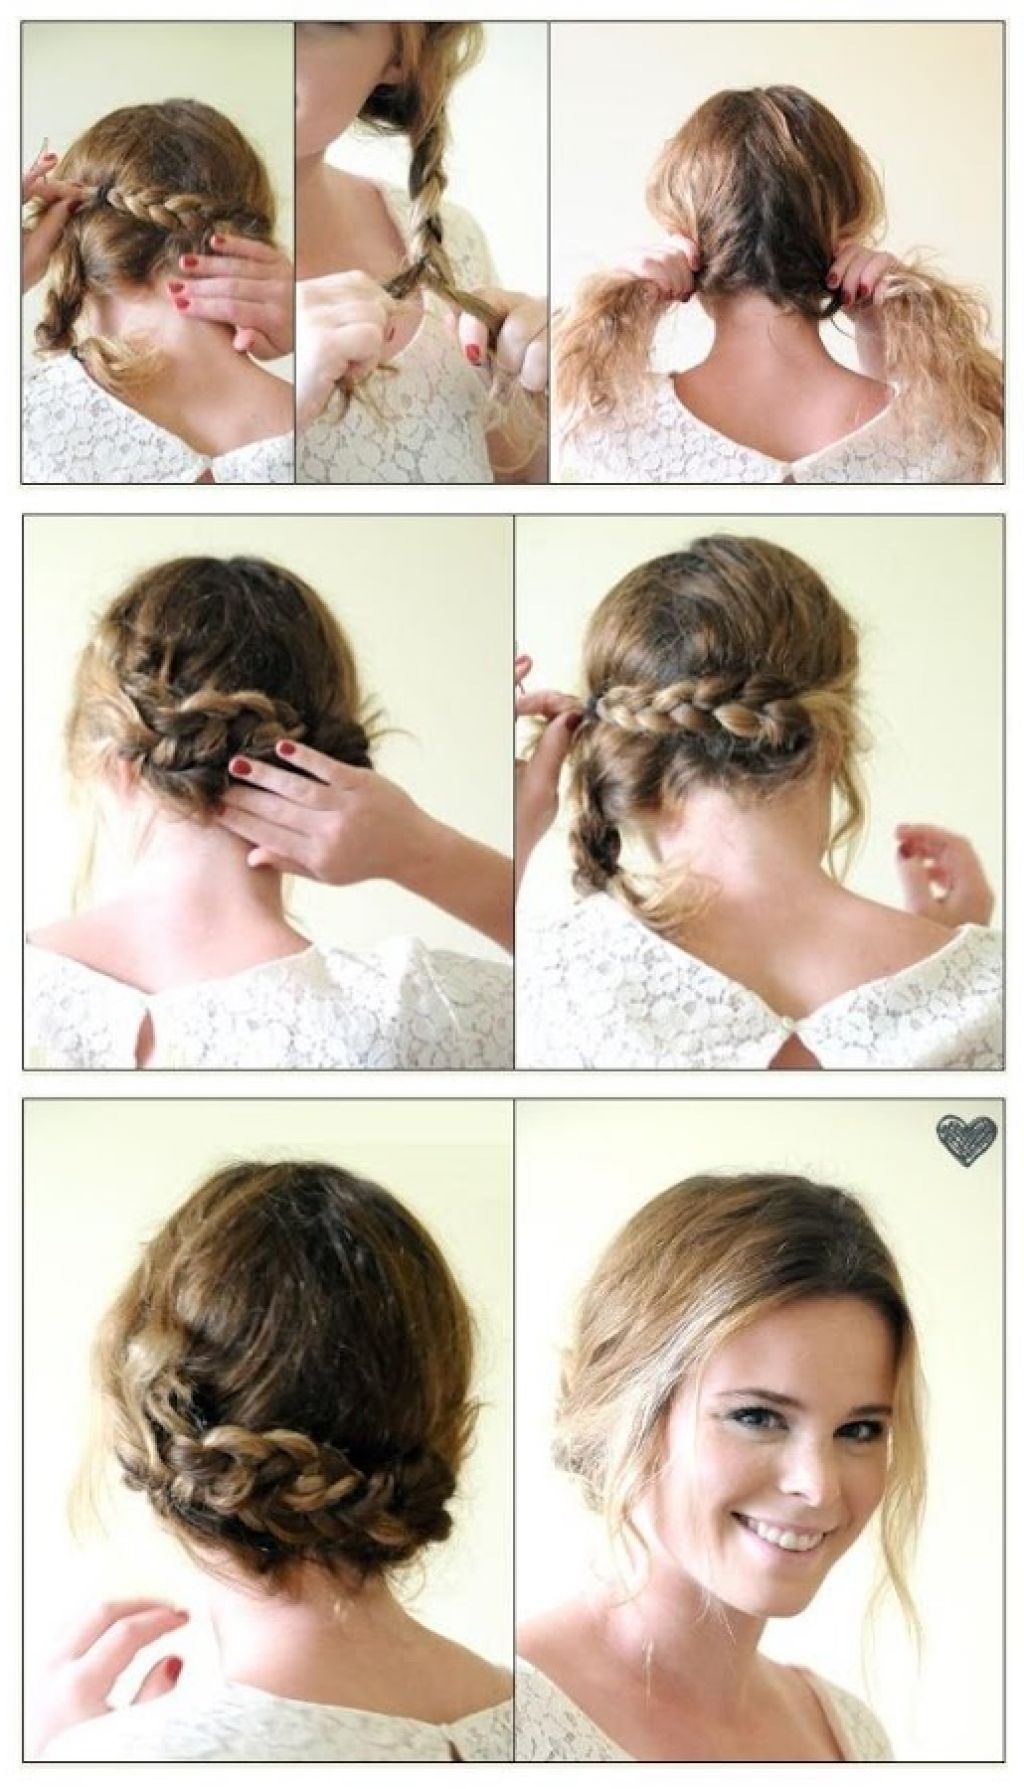 Braided Updo Hairstyles For Short Hair Prom Hairstyles For Long Hair Inside Formal Short Hair Updo Hairstyles (View 13 of 15)